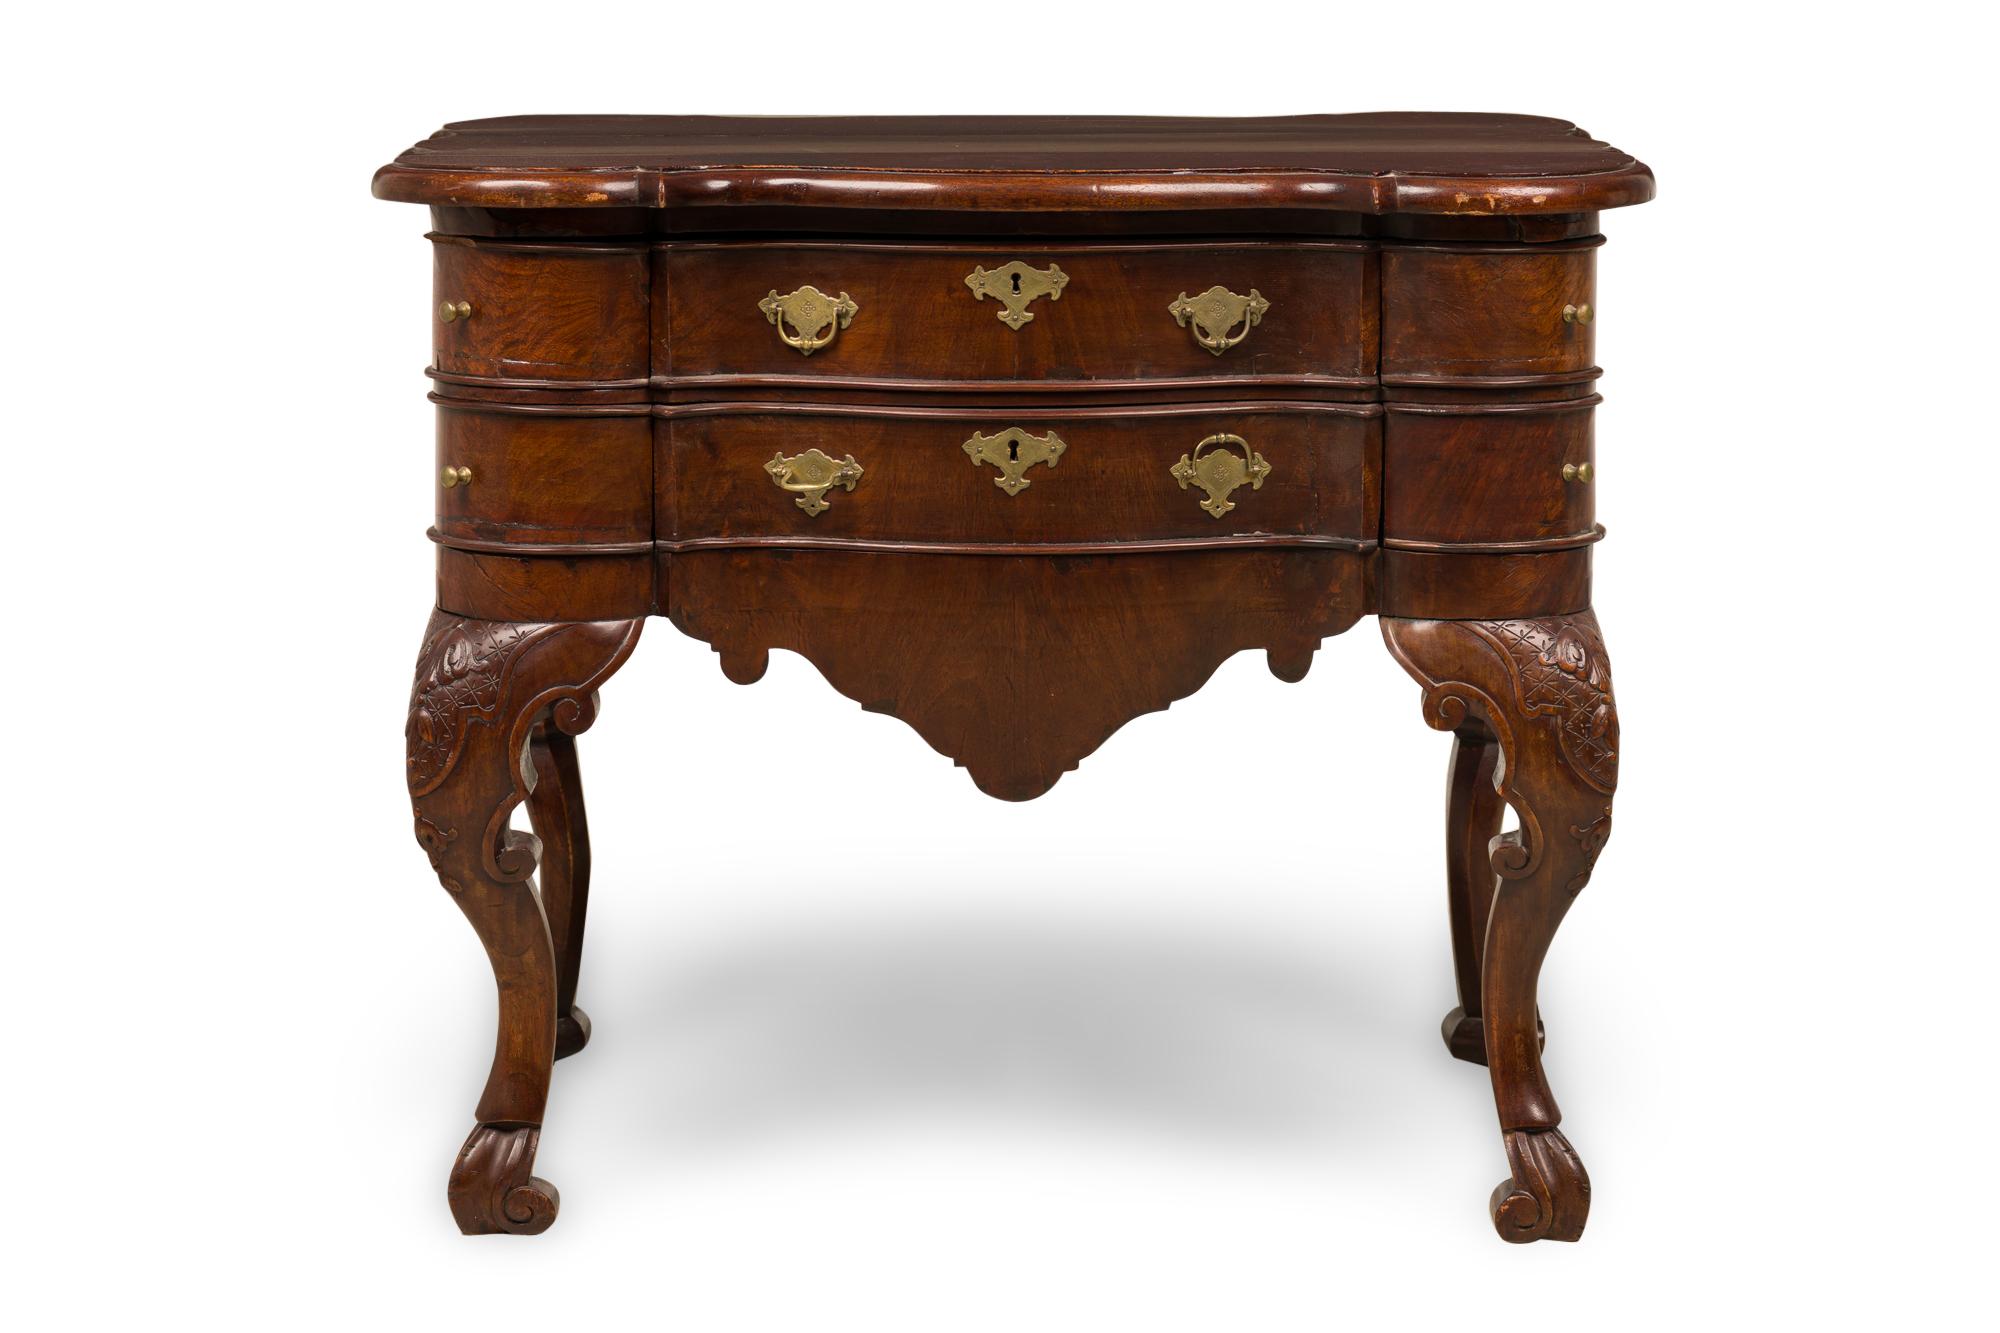 Dutch Continental (18th Century) lowboy / center table with 2 drawers having original etched brass handles centering rounded side drawers above a shaped top and resting on carved cabriole legs (finished back).